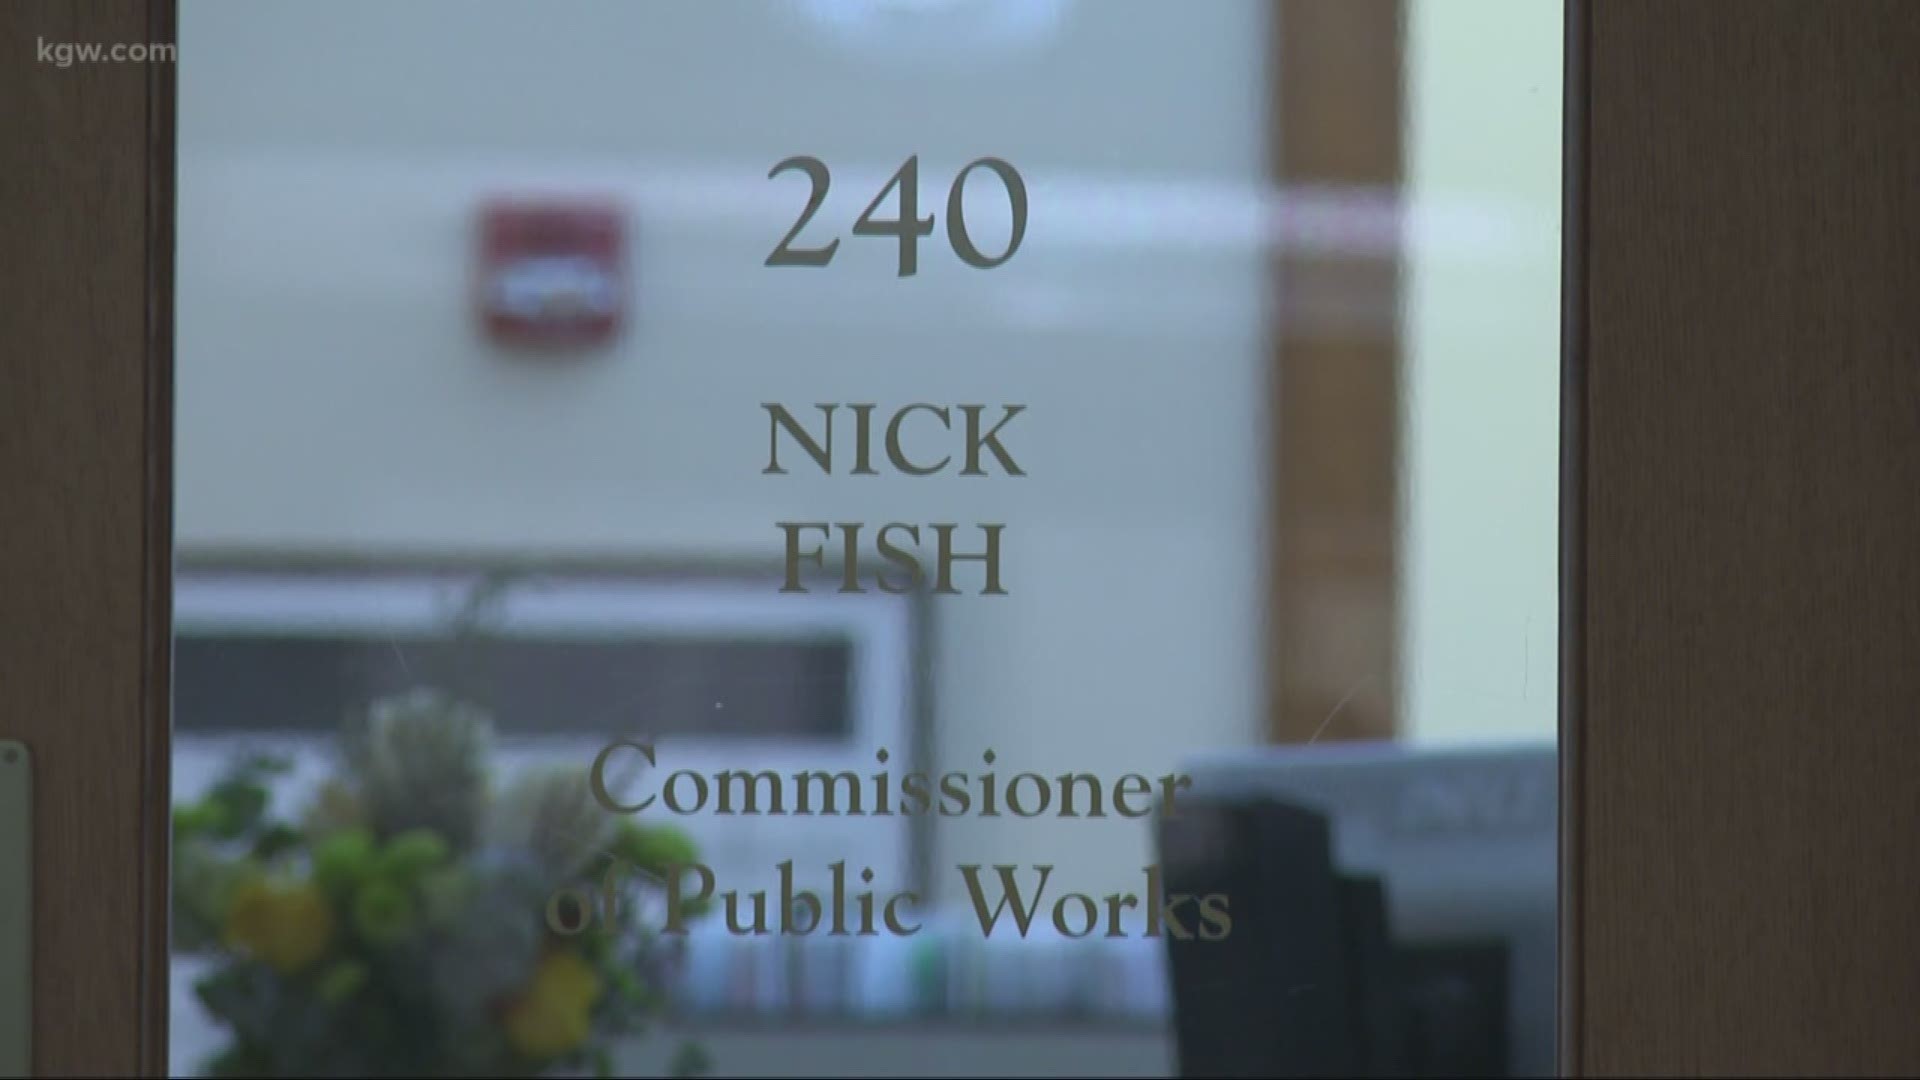 Portland City Council on Wednesday decided to fill Commissioner Nick Fish's seat with a May election. Fish died last week after battling cancer.